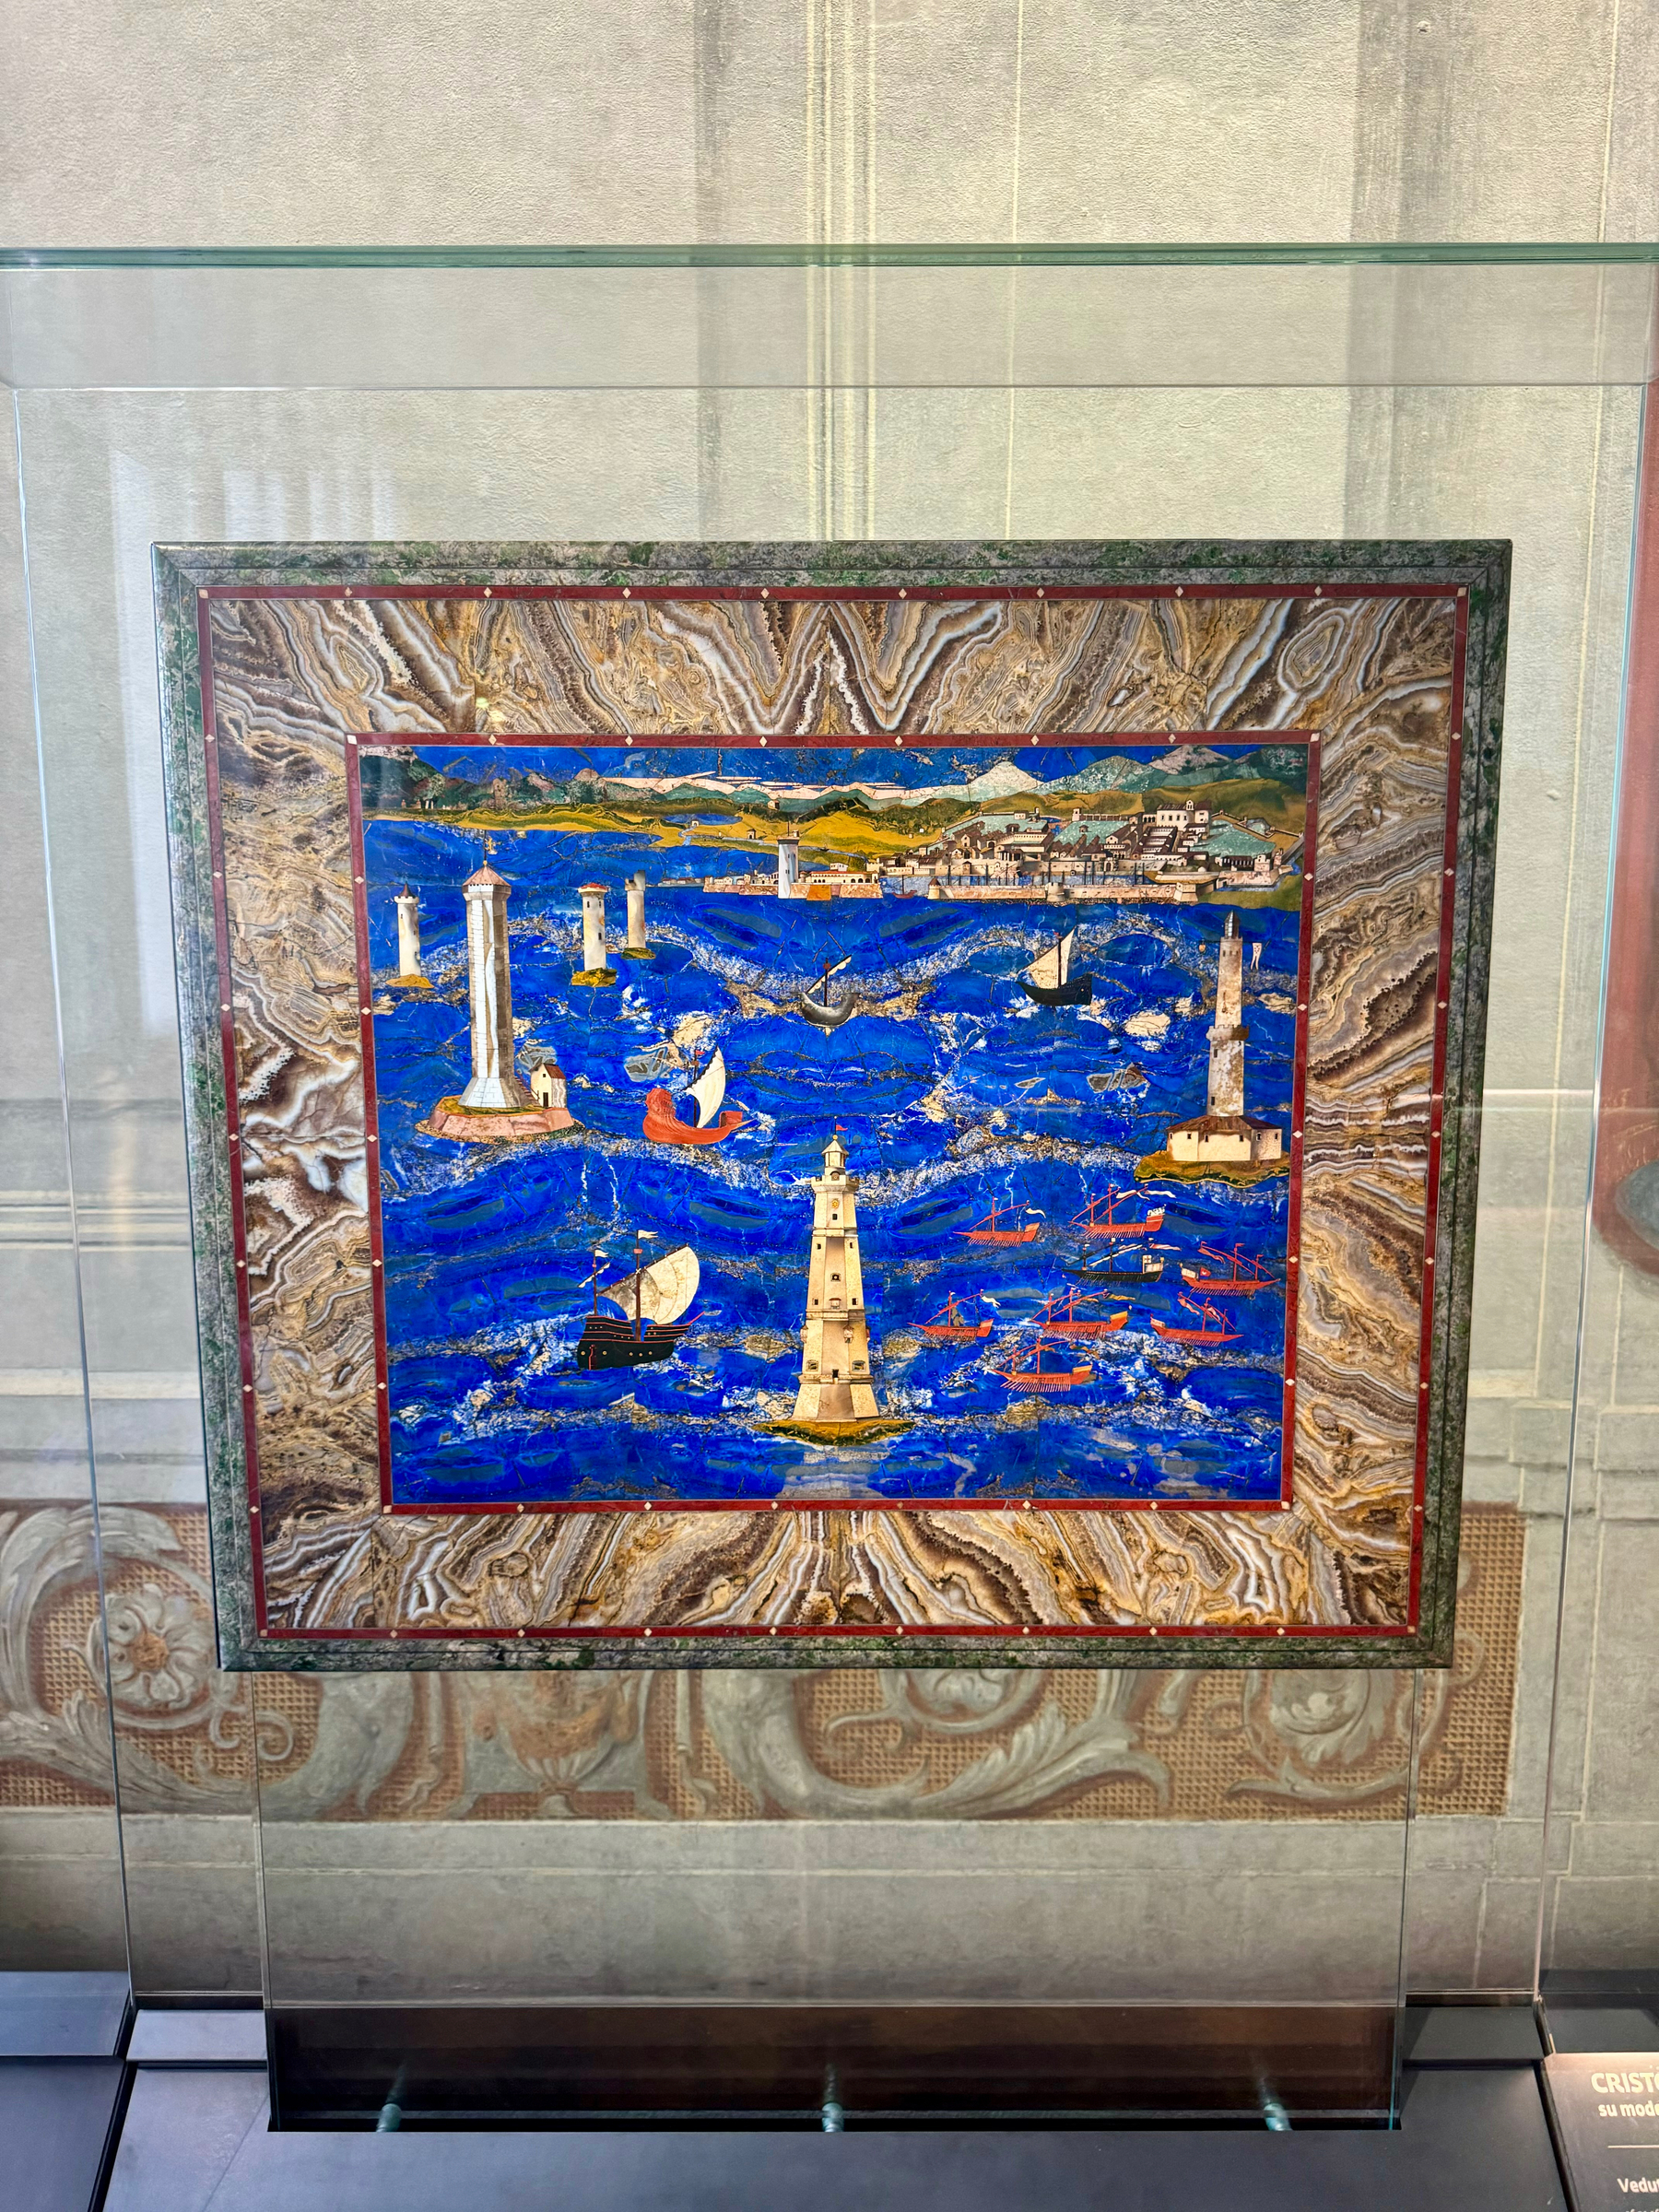 This image shows a colorful artwork display featuring a vivid depiction of a coastal scene with a tall lighthouse and several sailboats on a vibrant blue sea. The artwork is encased in a glass display with a decorative, patterned stone frame.